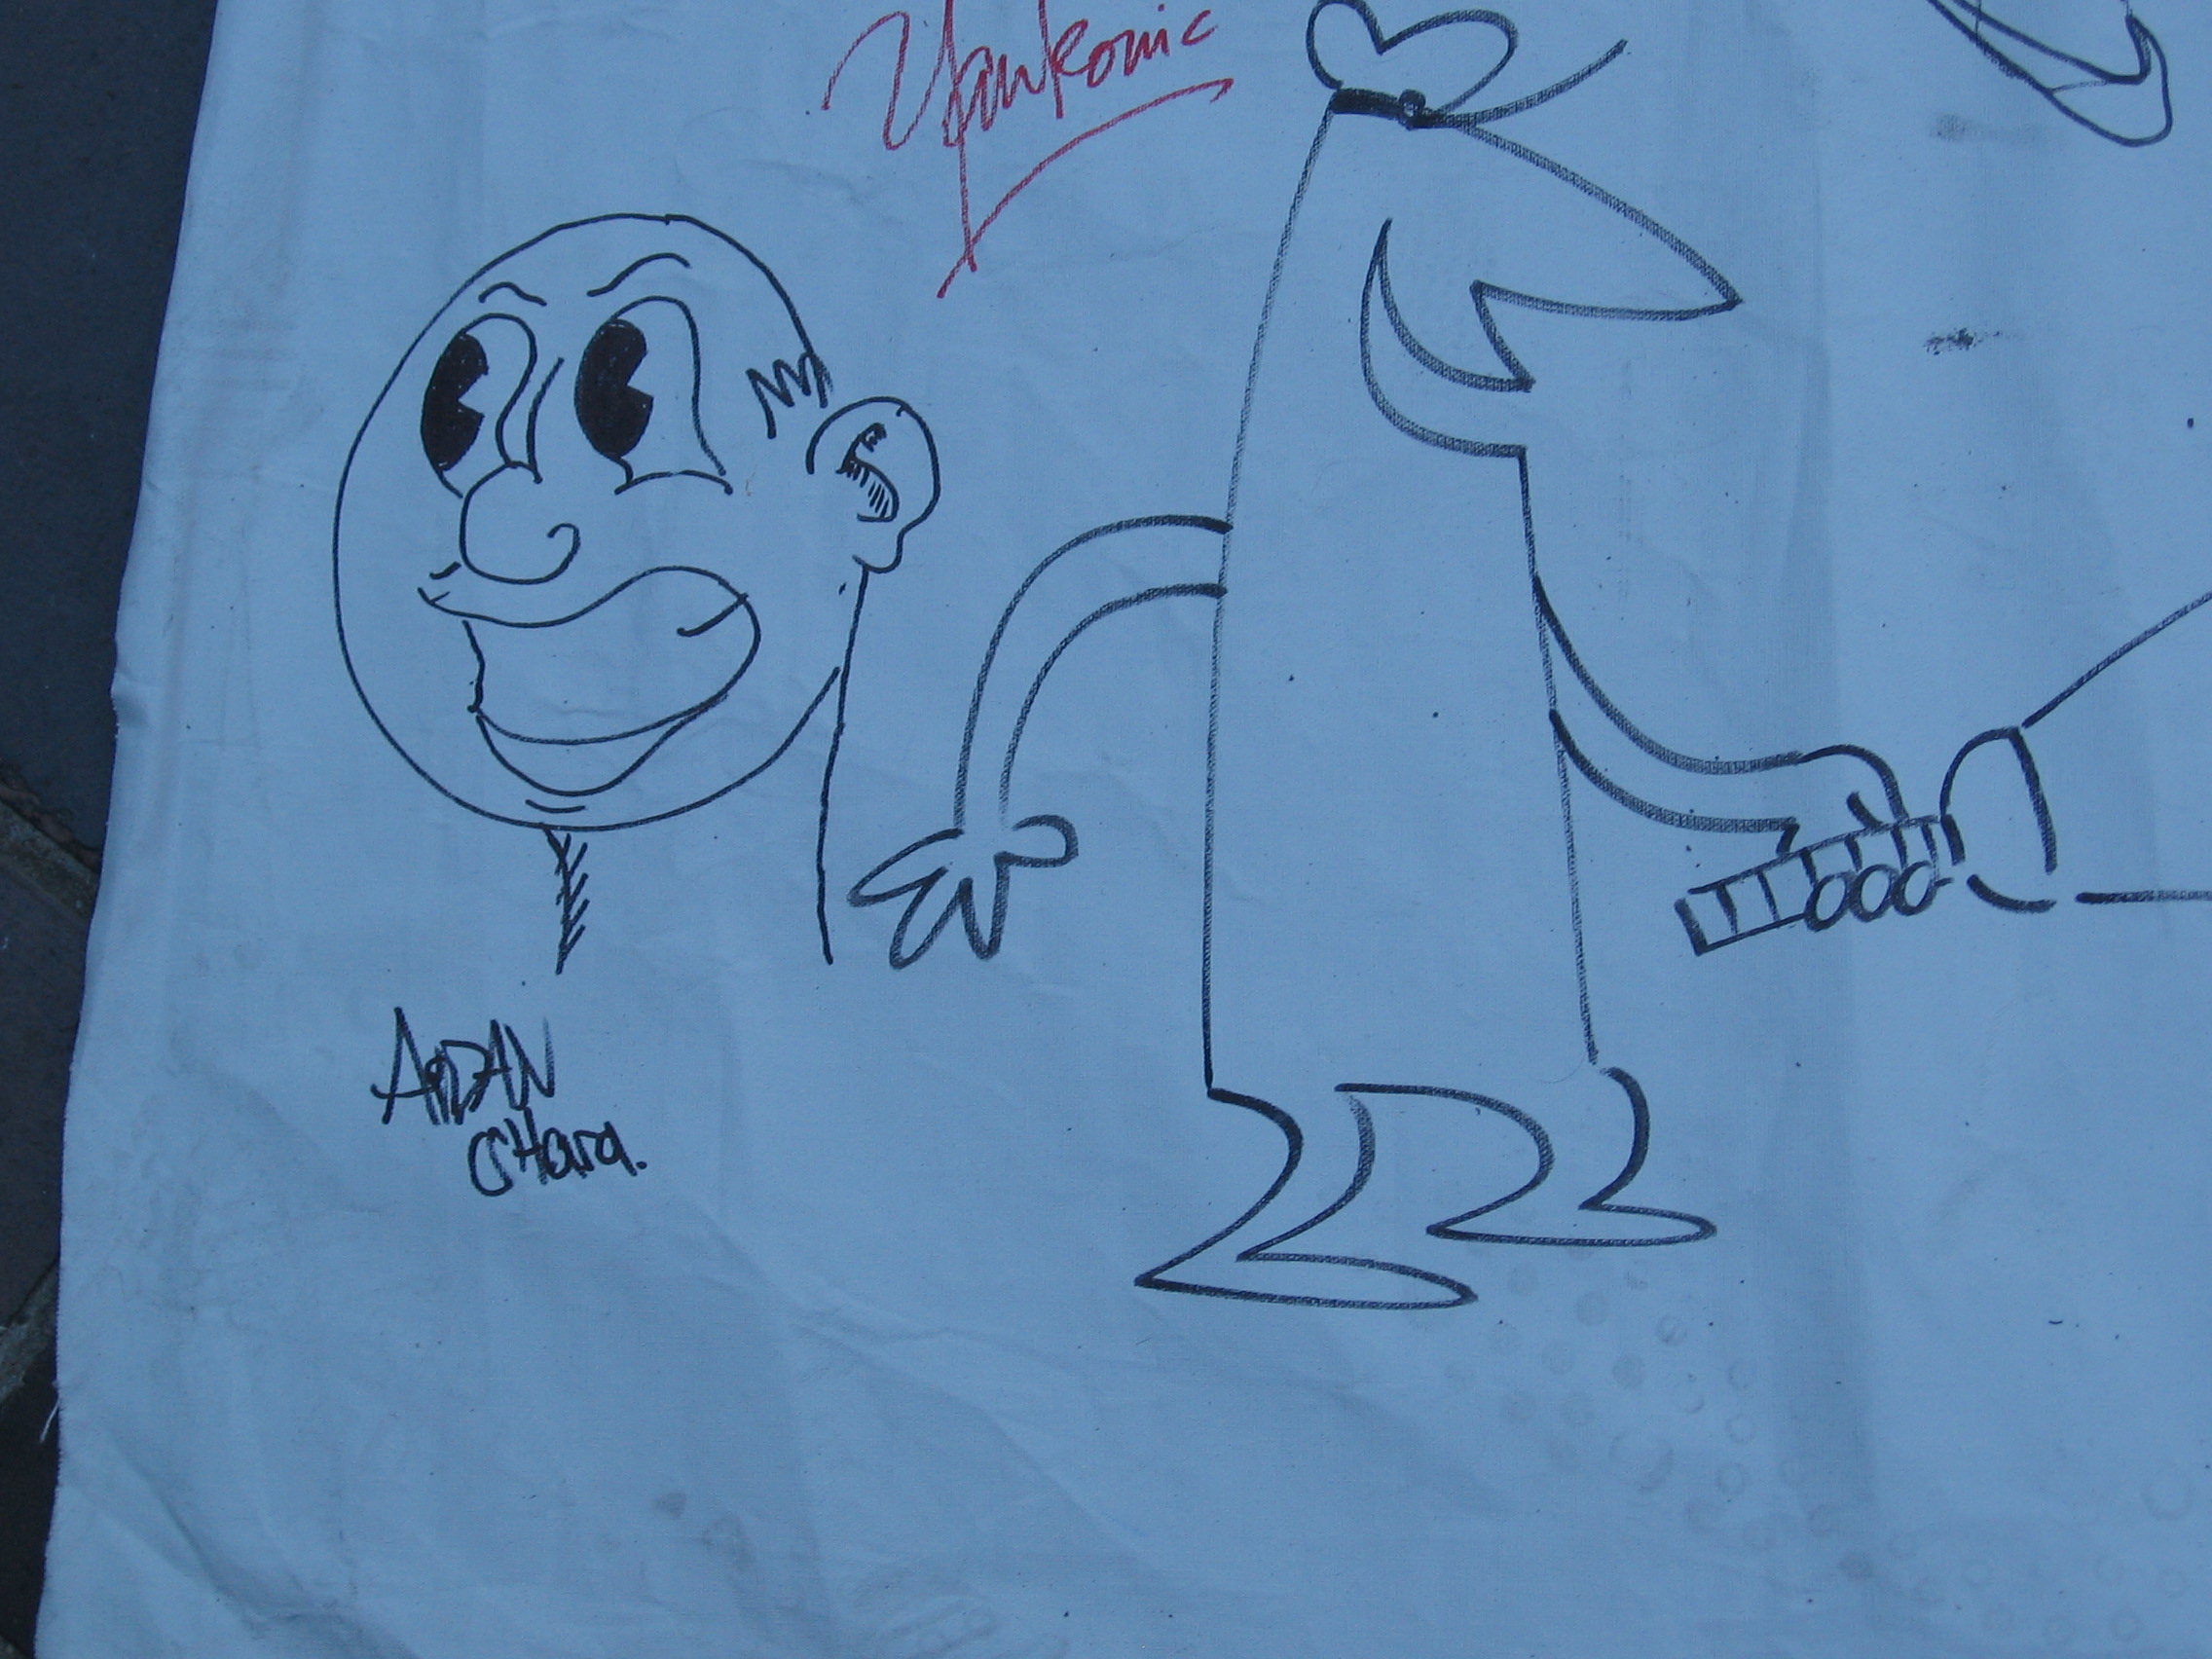 MR HAPPY character designer Aidan O'Hara is honored to be invited by Spike to tag Spike's classic Animation Graffiti Mural Photo taken at the 2006 Annecy Int Animation Film Festival